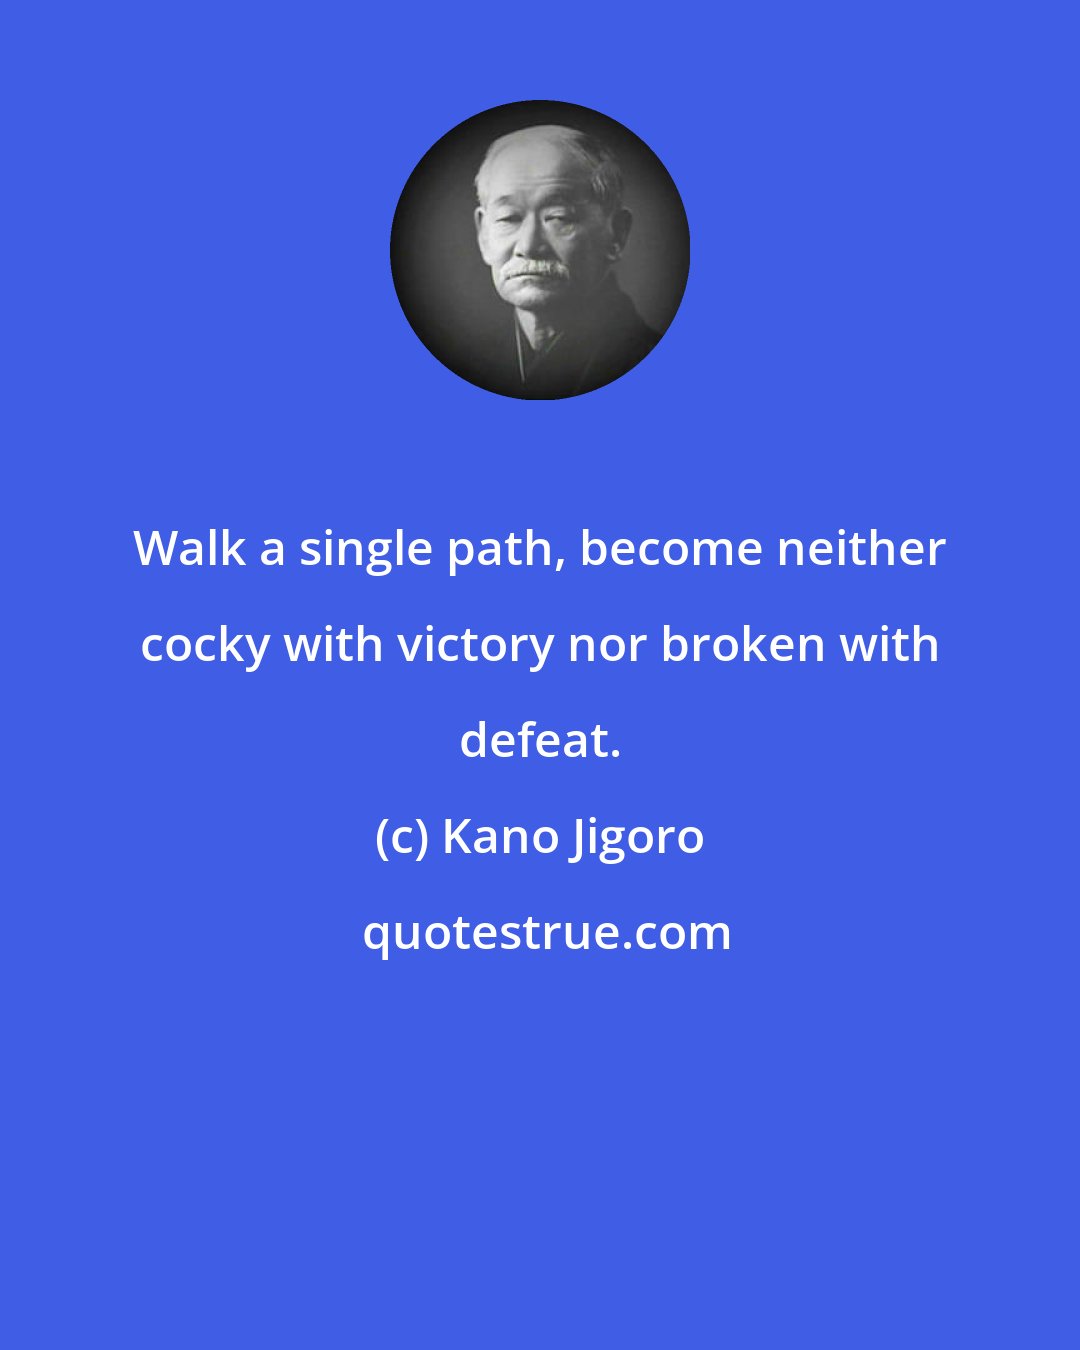 Kano Jigoro: Walk a single path, become neither cocky with victory nor broken with defeat.